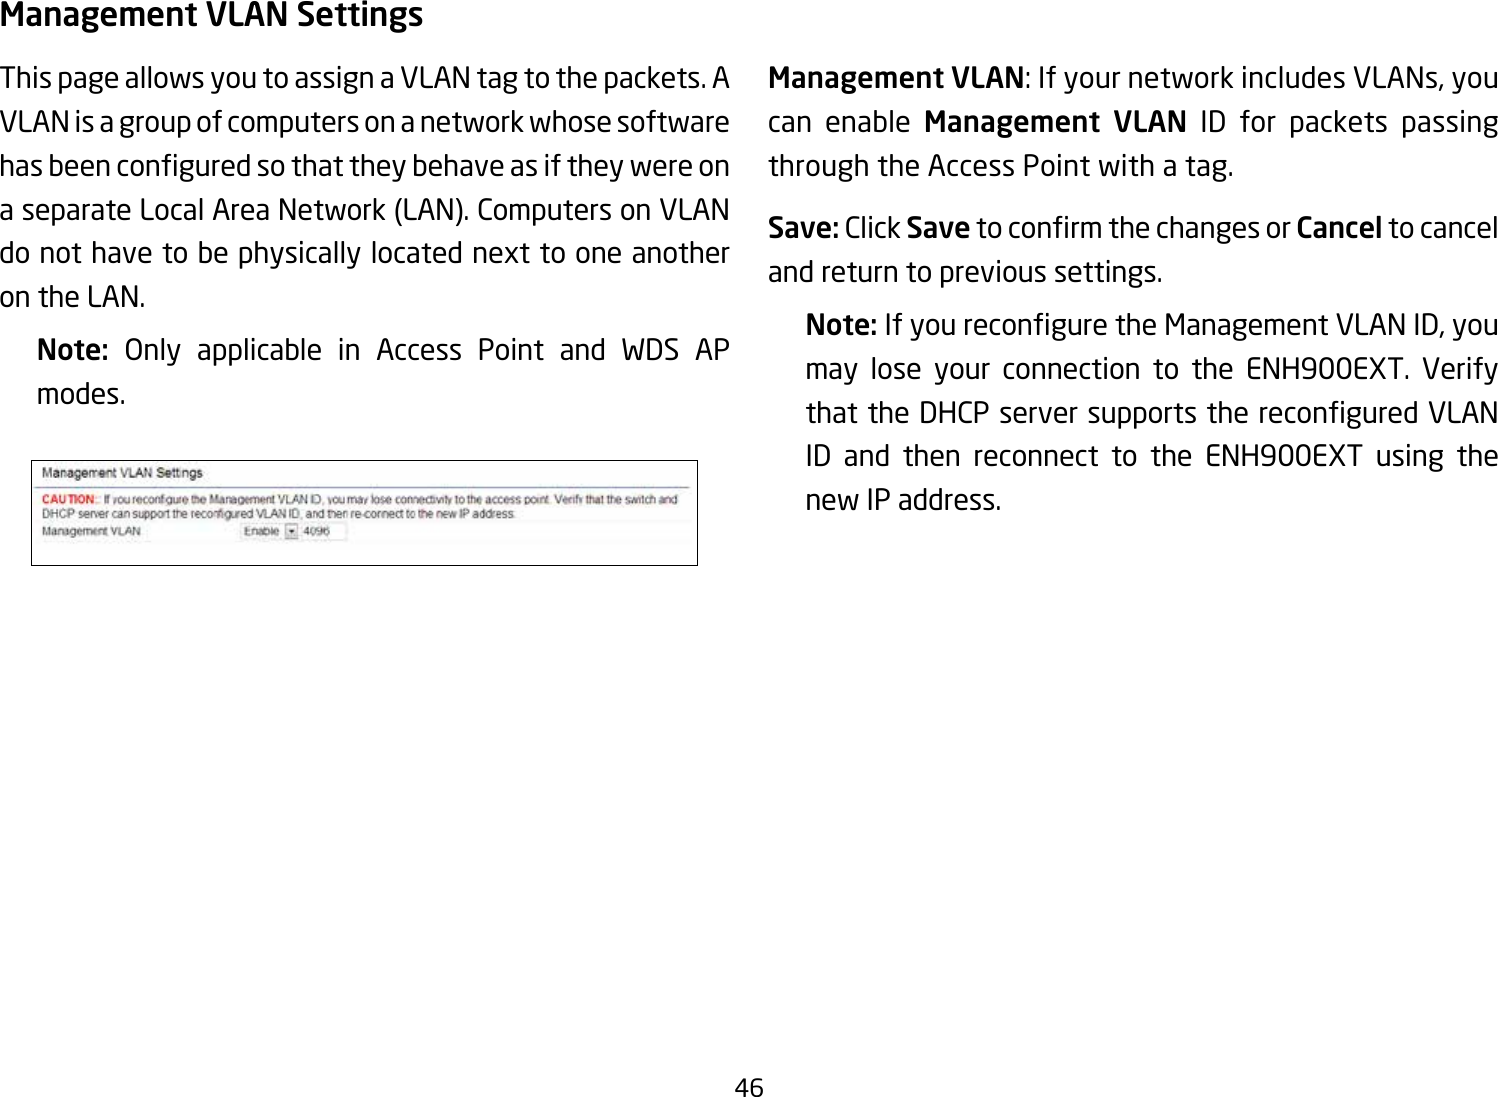 46Management VLAN SettingsThis page allows you to assign a VLAN tag to the packets. A VLAN is a group of computers on a network whose software hasbeenconguredsothattheybehaveasiftheywereona separate Local Area Network (LAN). Computers on VLAN do not have to be physically located next to one another on the LAN.Note:  Only applicable in Access Point and WDS APmodes.     Management VLAN: If your network includes VLANs, you can enable Management  VLAN ID for packets passing through the Access Point with a tag. Save: Click SavetoconrmthechangesorCancel to cancel and return to previous settings.Note: IfyoureconguretheManagementVLANID,youmay lose your connection to the ENH900EXT. Verify thattheDHCPserversupportsthereconguredVLANID and then reconnect to the ENH900EXT using the new IP address. 